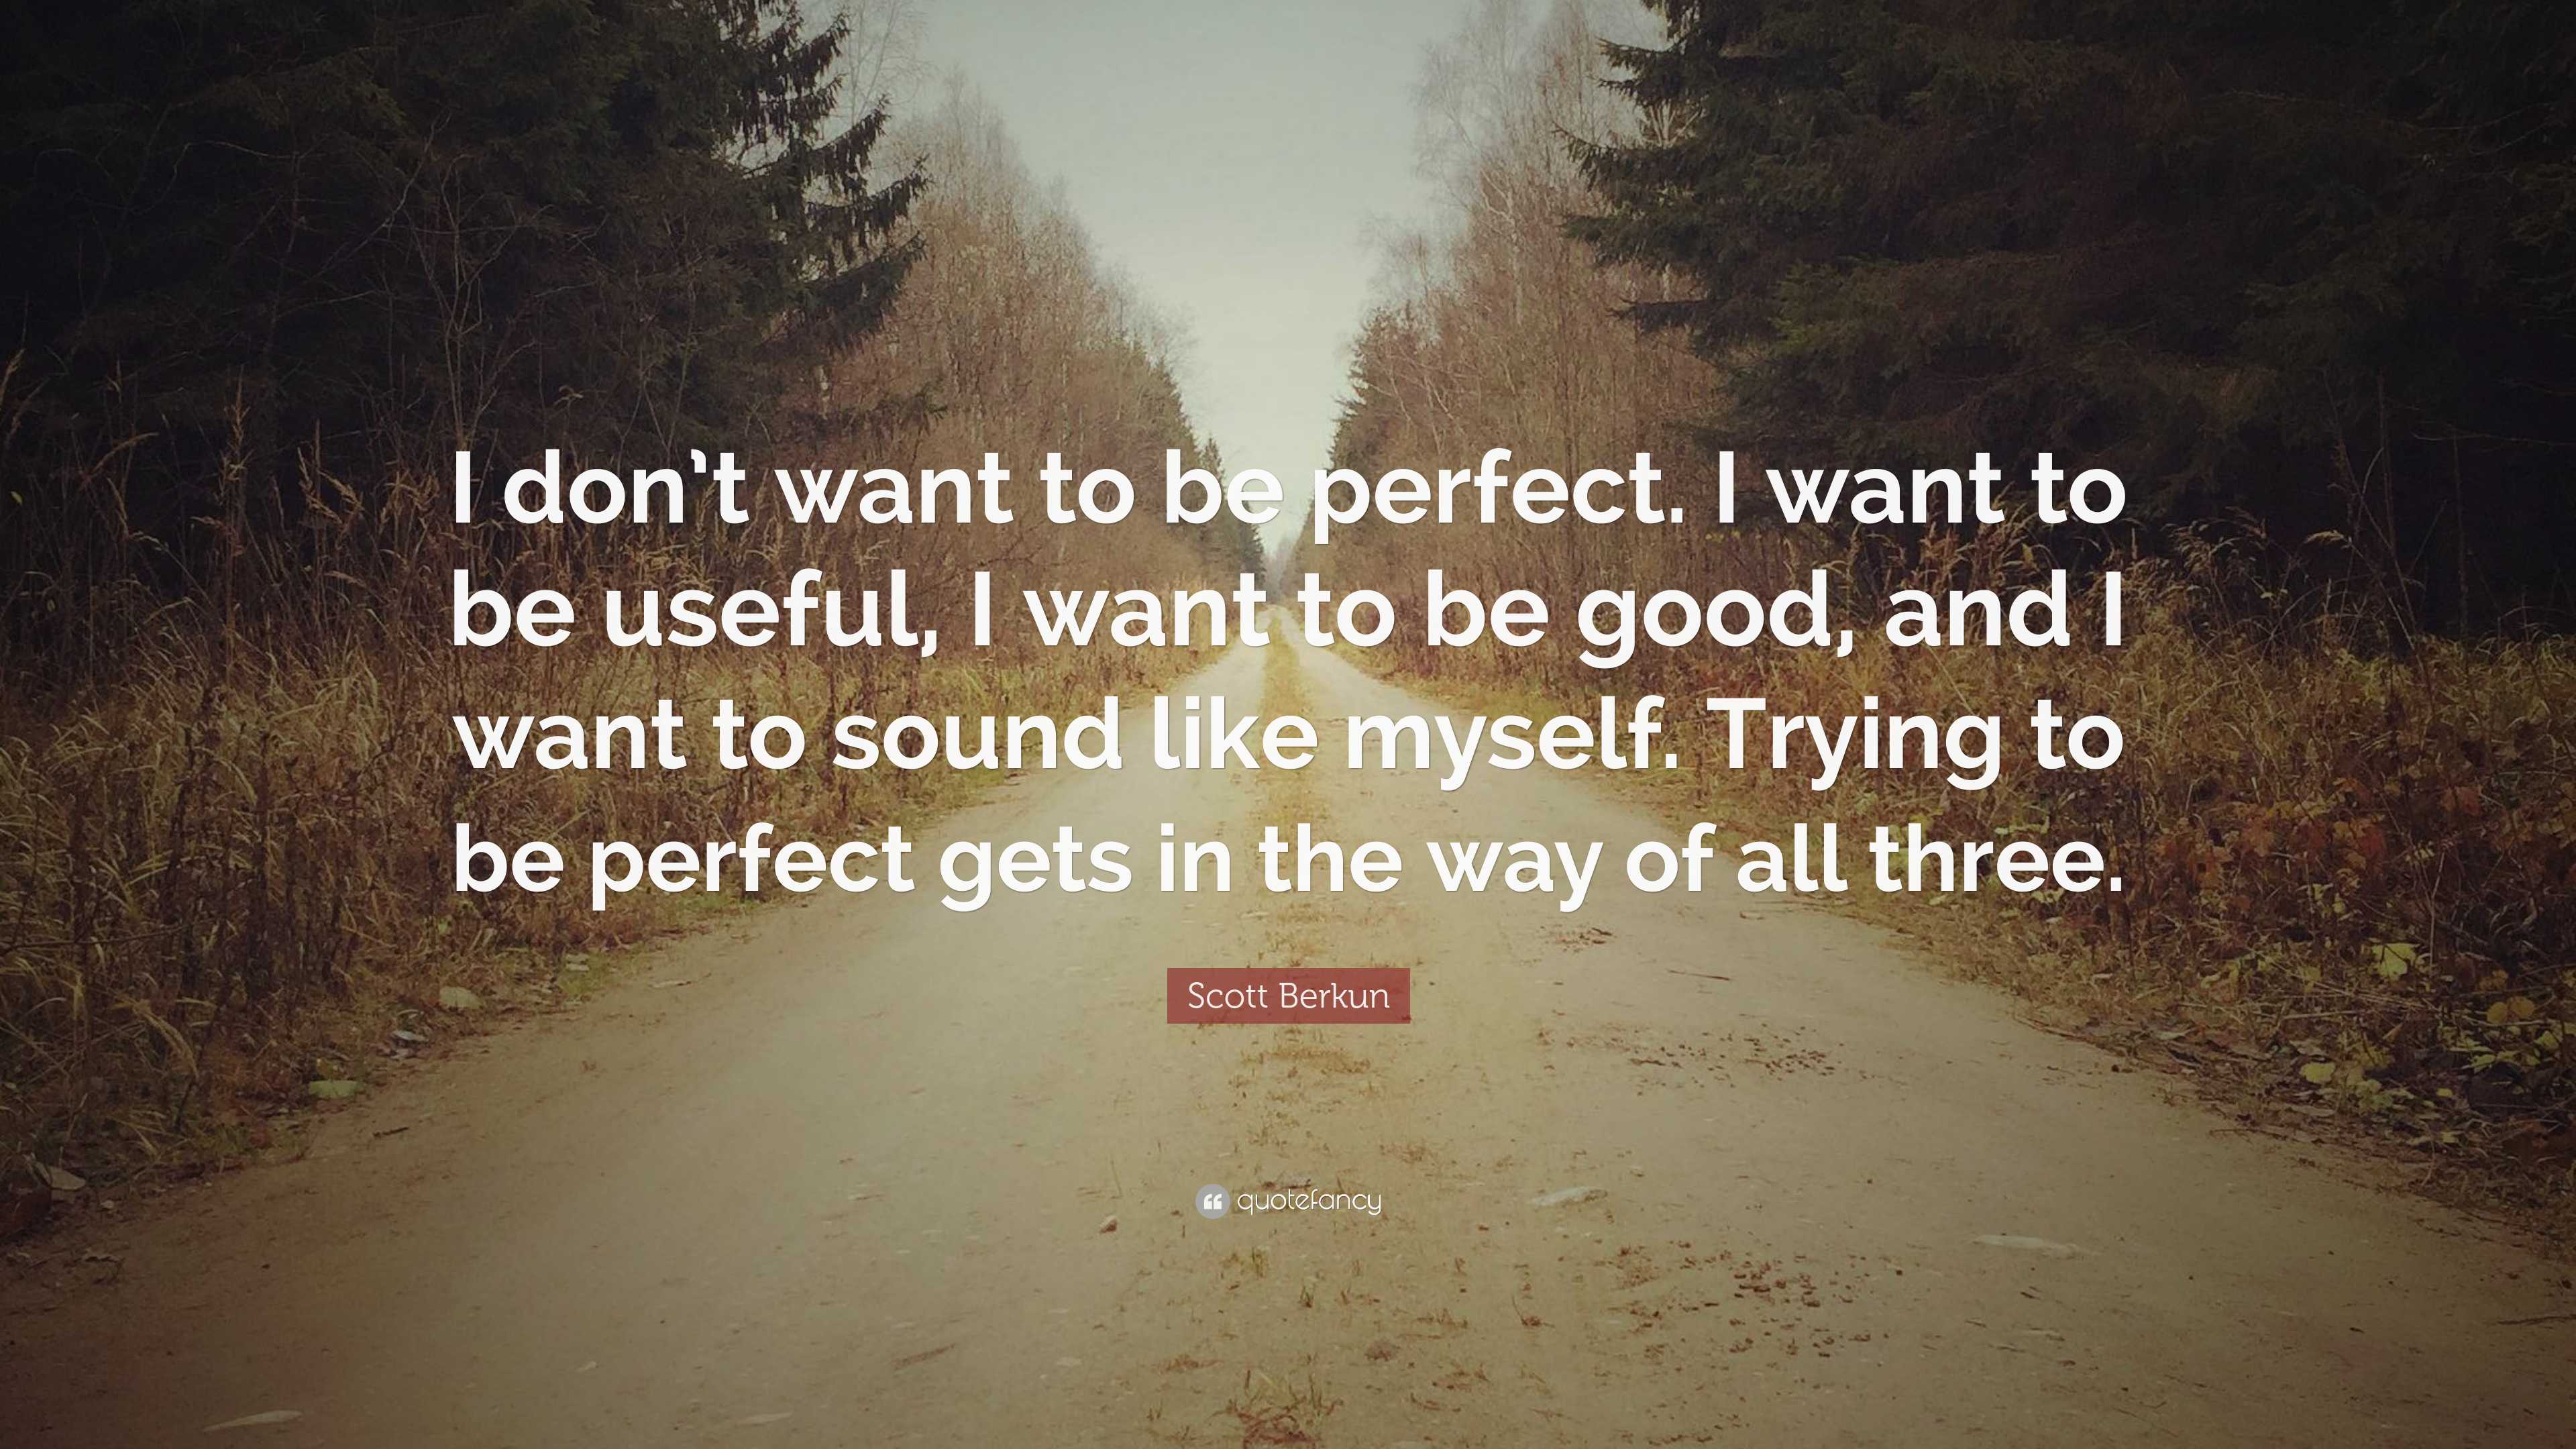 Scott Berkun Quote: “I don't want to be perfect. I want to be useful, I want  to be good, and I want to sound like myself. Trying to be perfec”